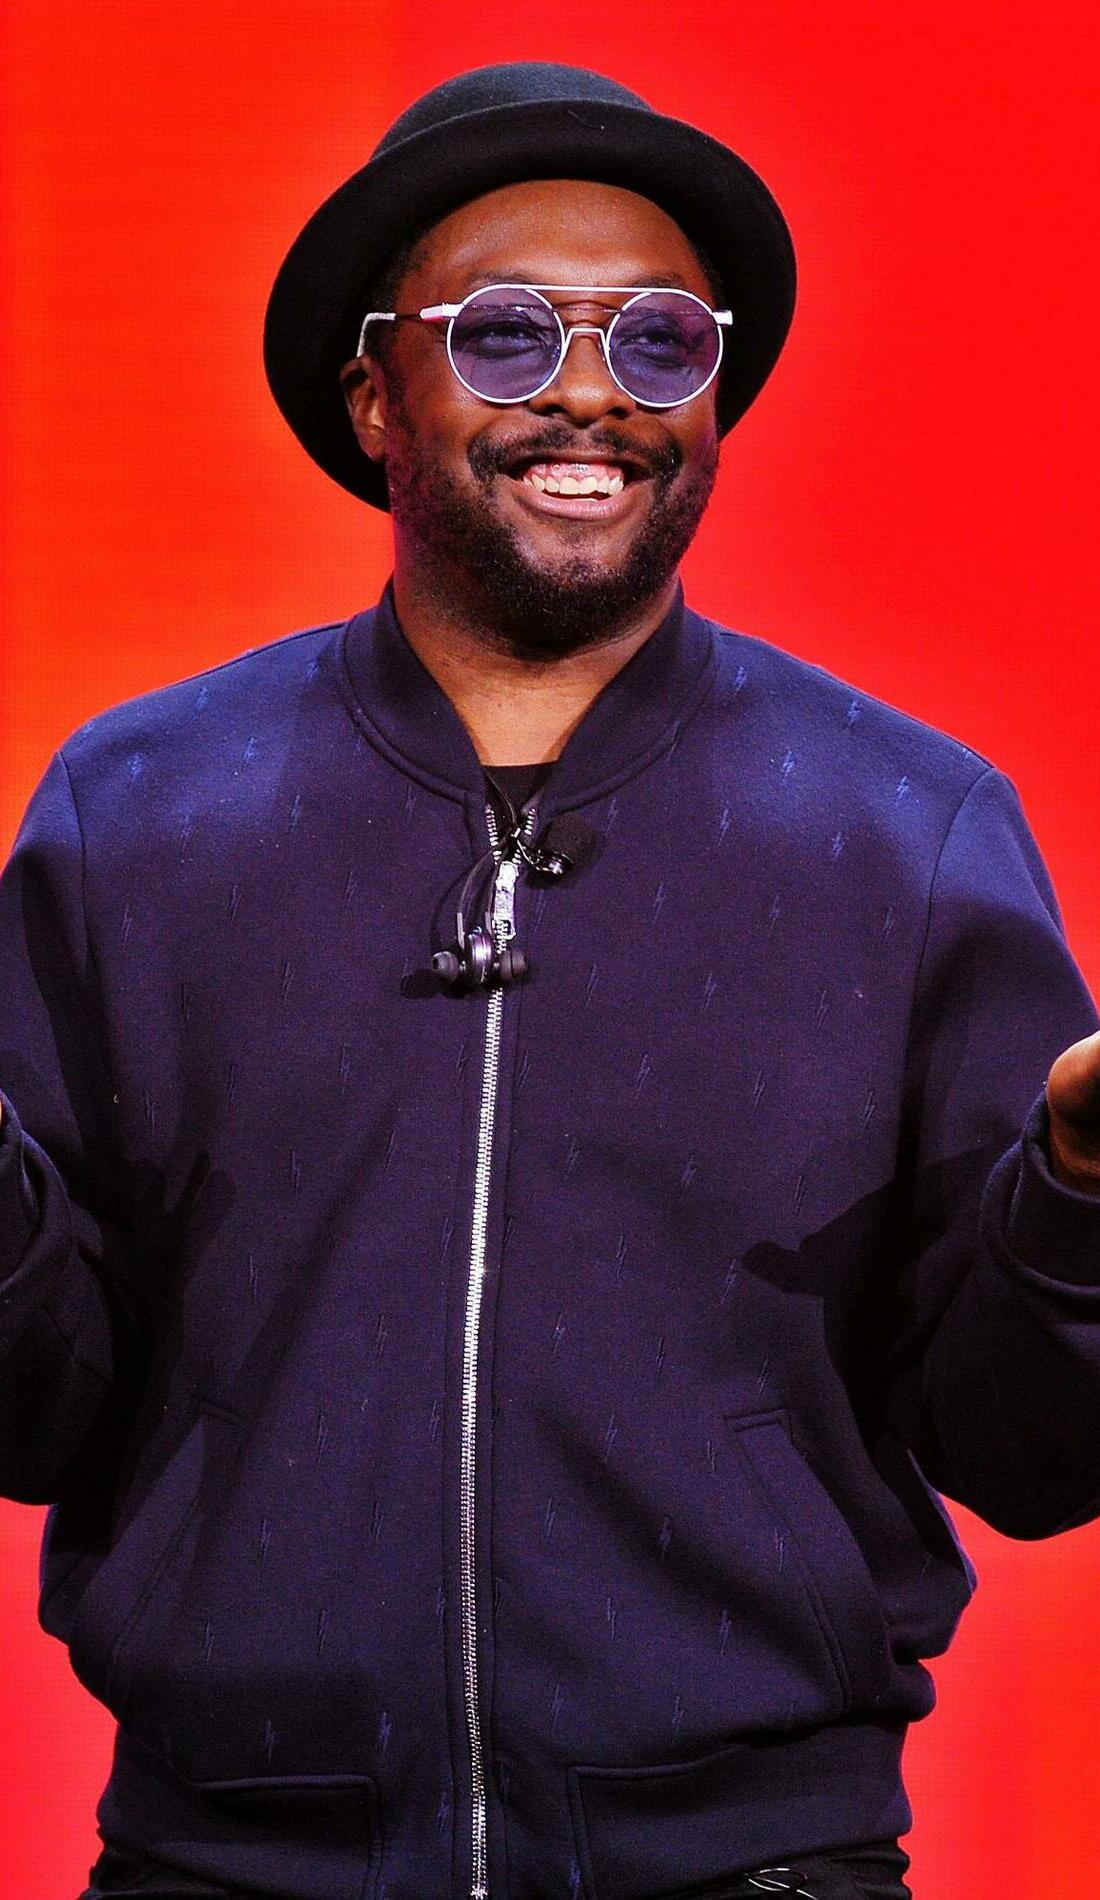 A will.i.am live event